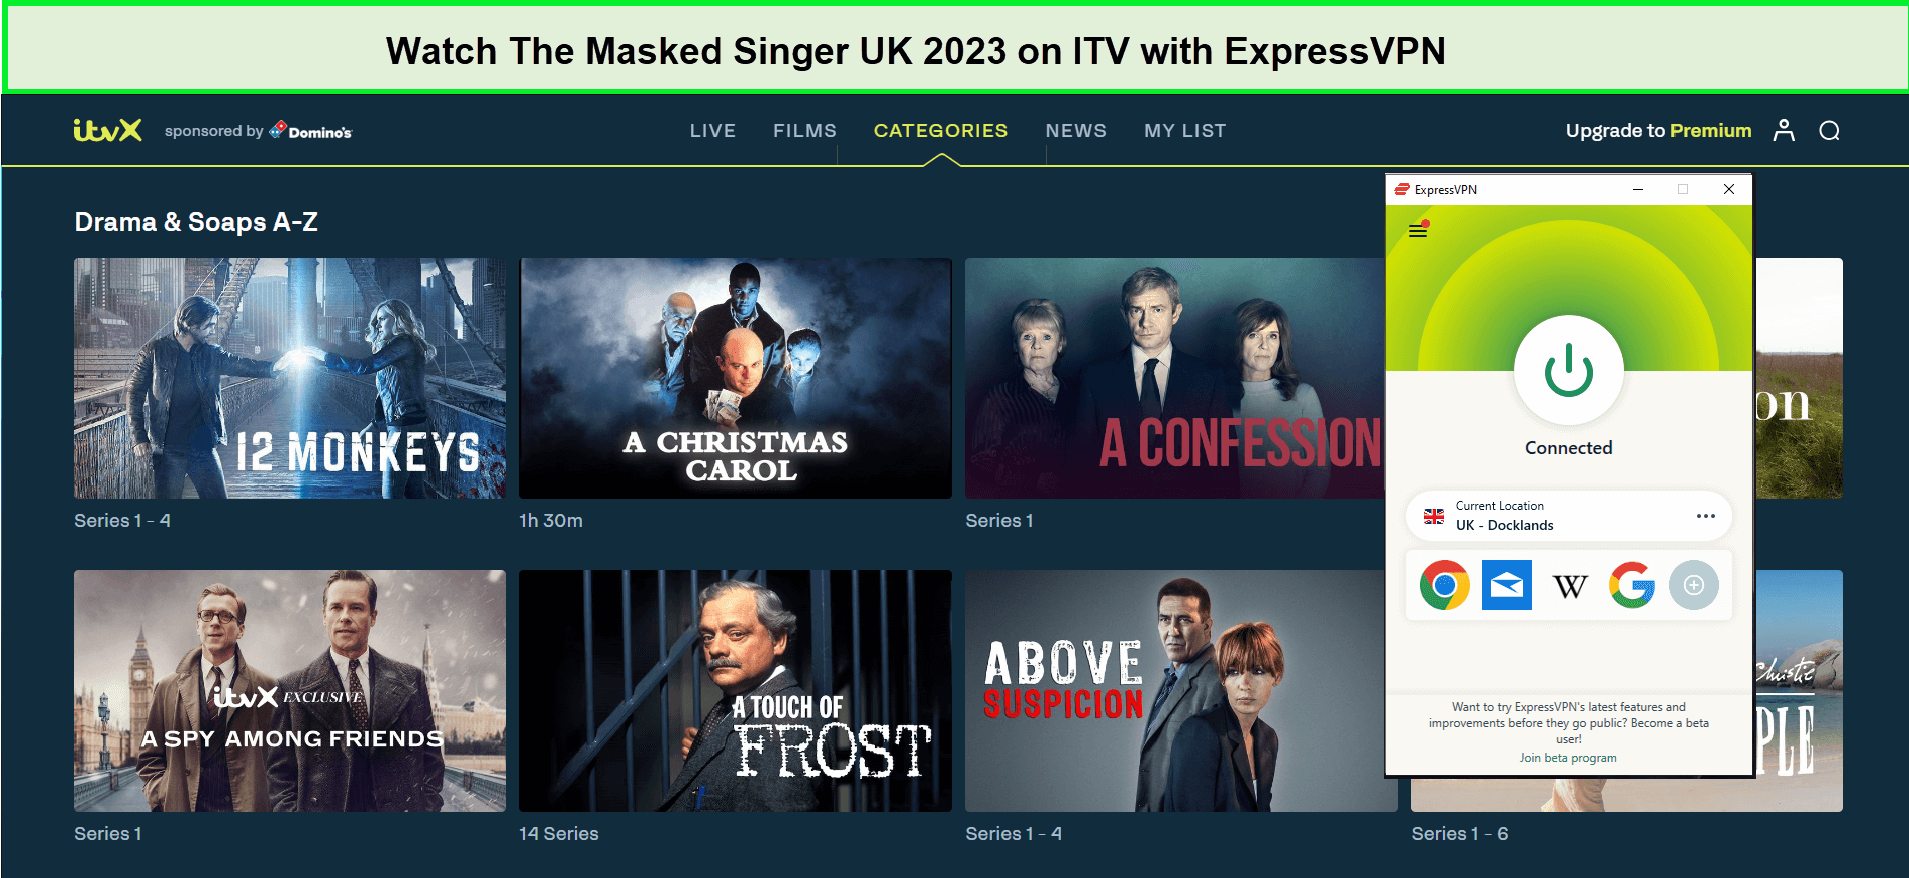 Watch-The-Masked-Singer-UK-2023-in-Hong Kong-on-ITV-with-ExpressVPN